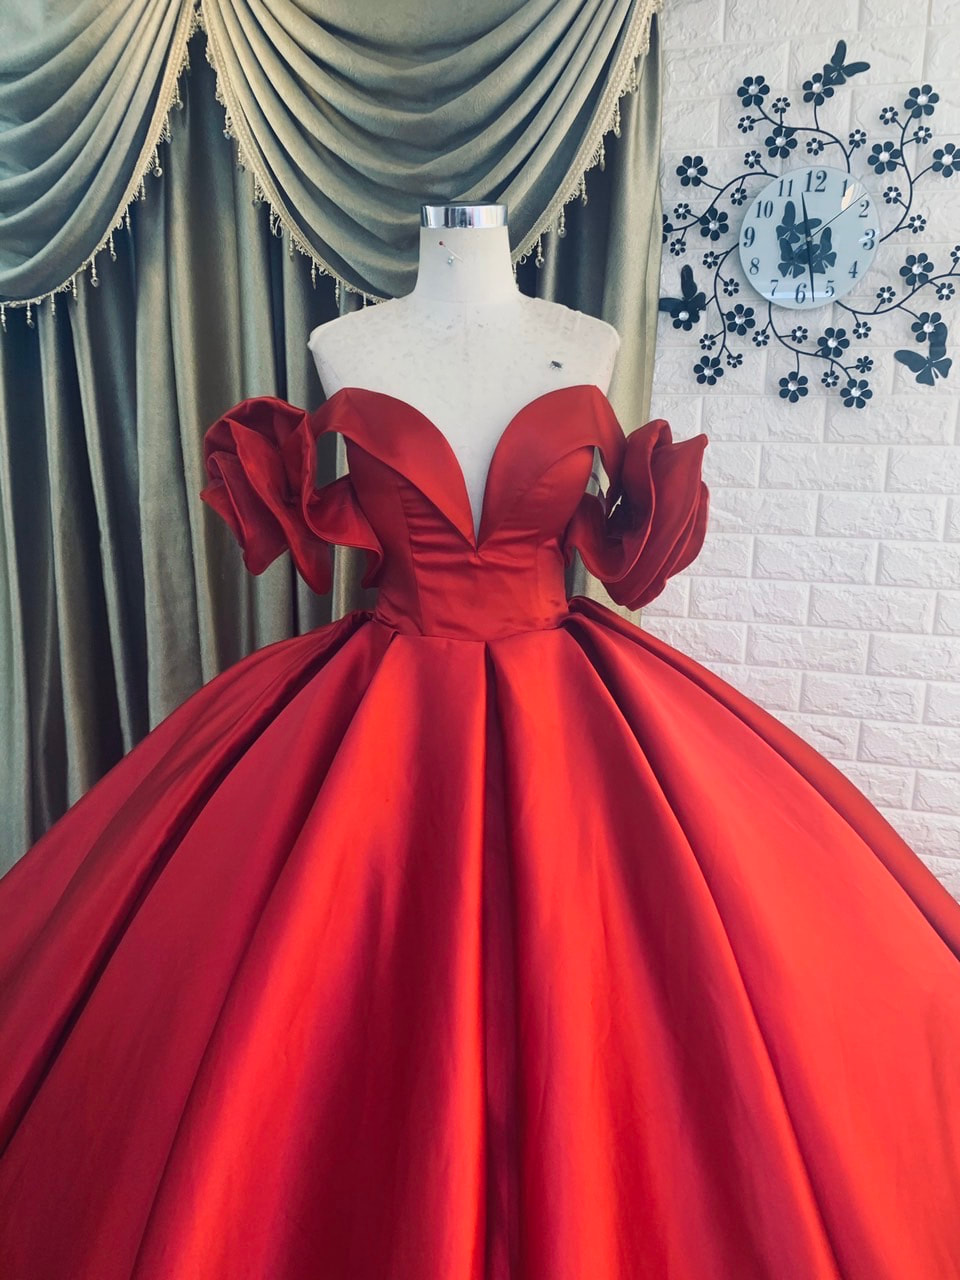 Fiery Red Off-the-Shoulder Girls' Dress with Bow Sleeves - BRIDAL FASHION ™